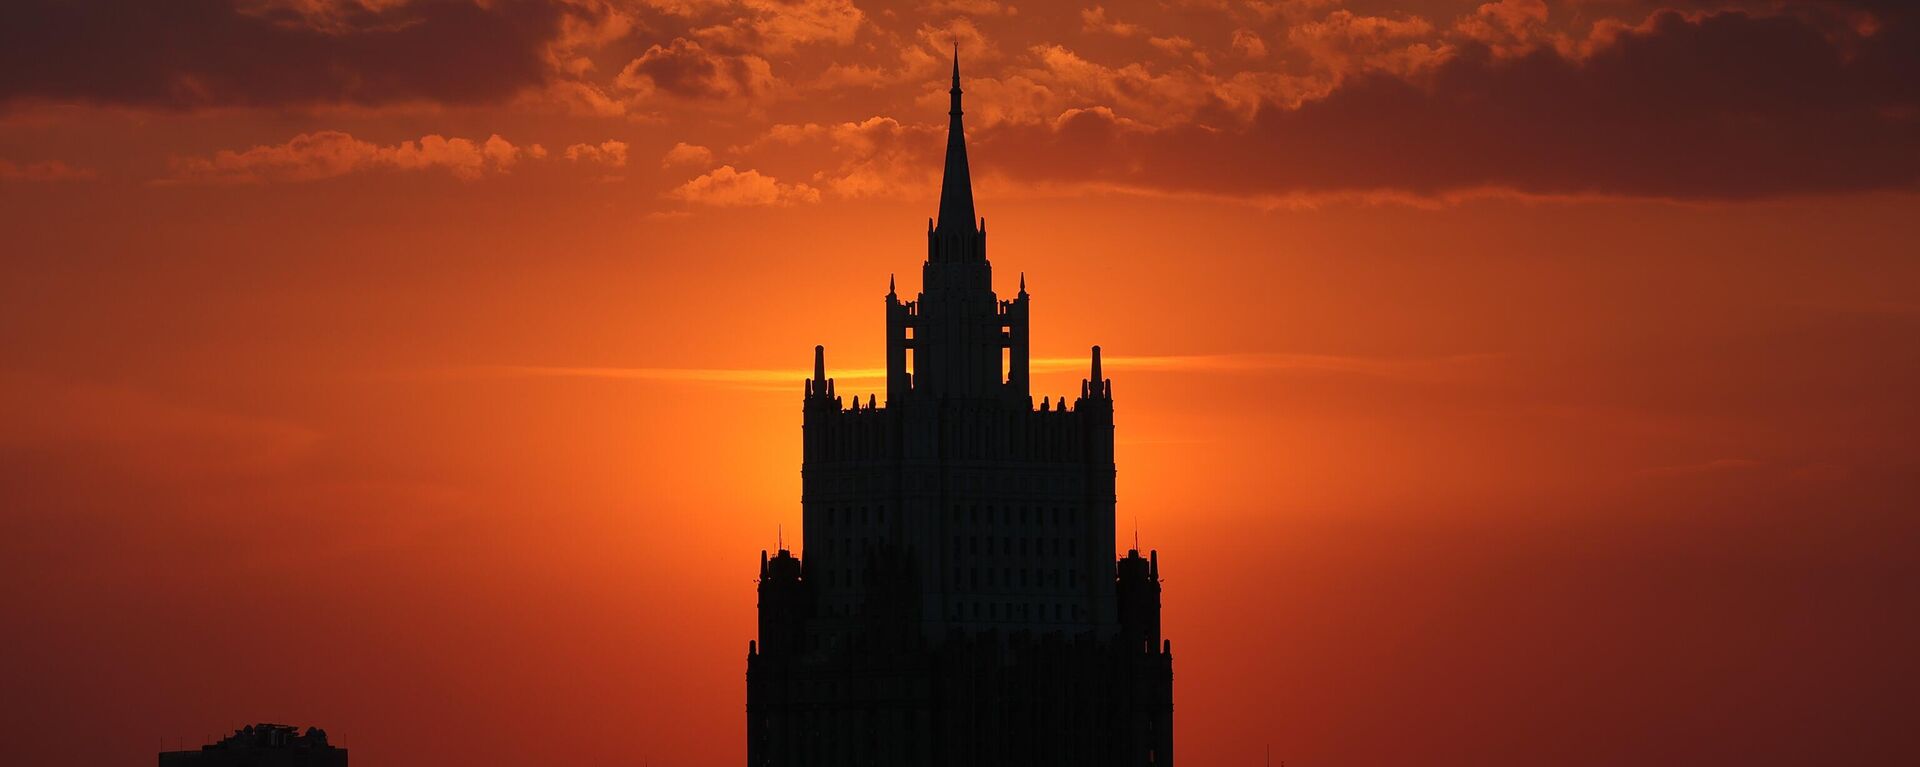 Russian Foreign Ministry's building is silhouetted against the setting sun, in Moscow, Russia.  - Sputnik International, 1920, 17.01.2024